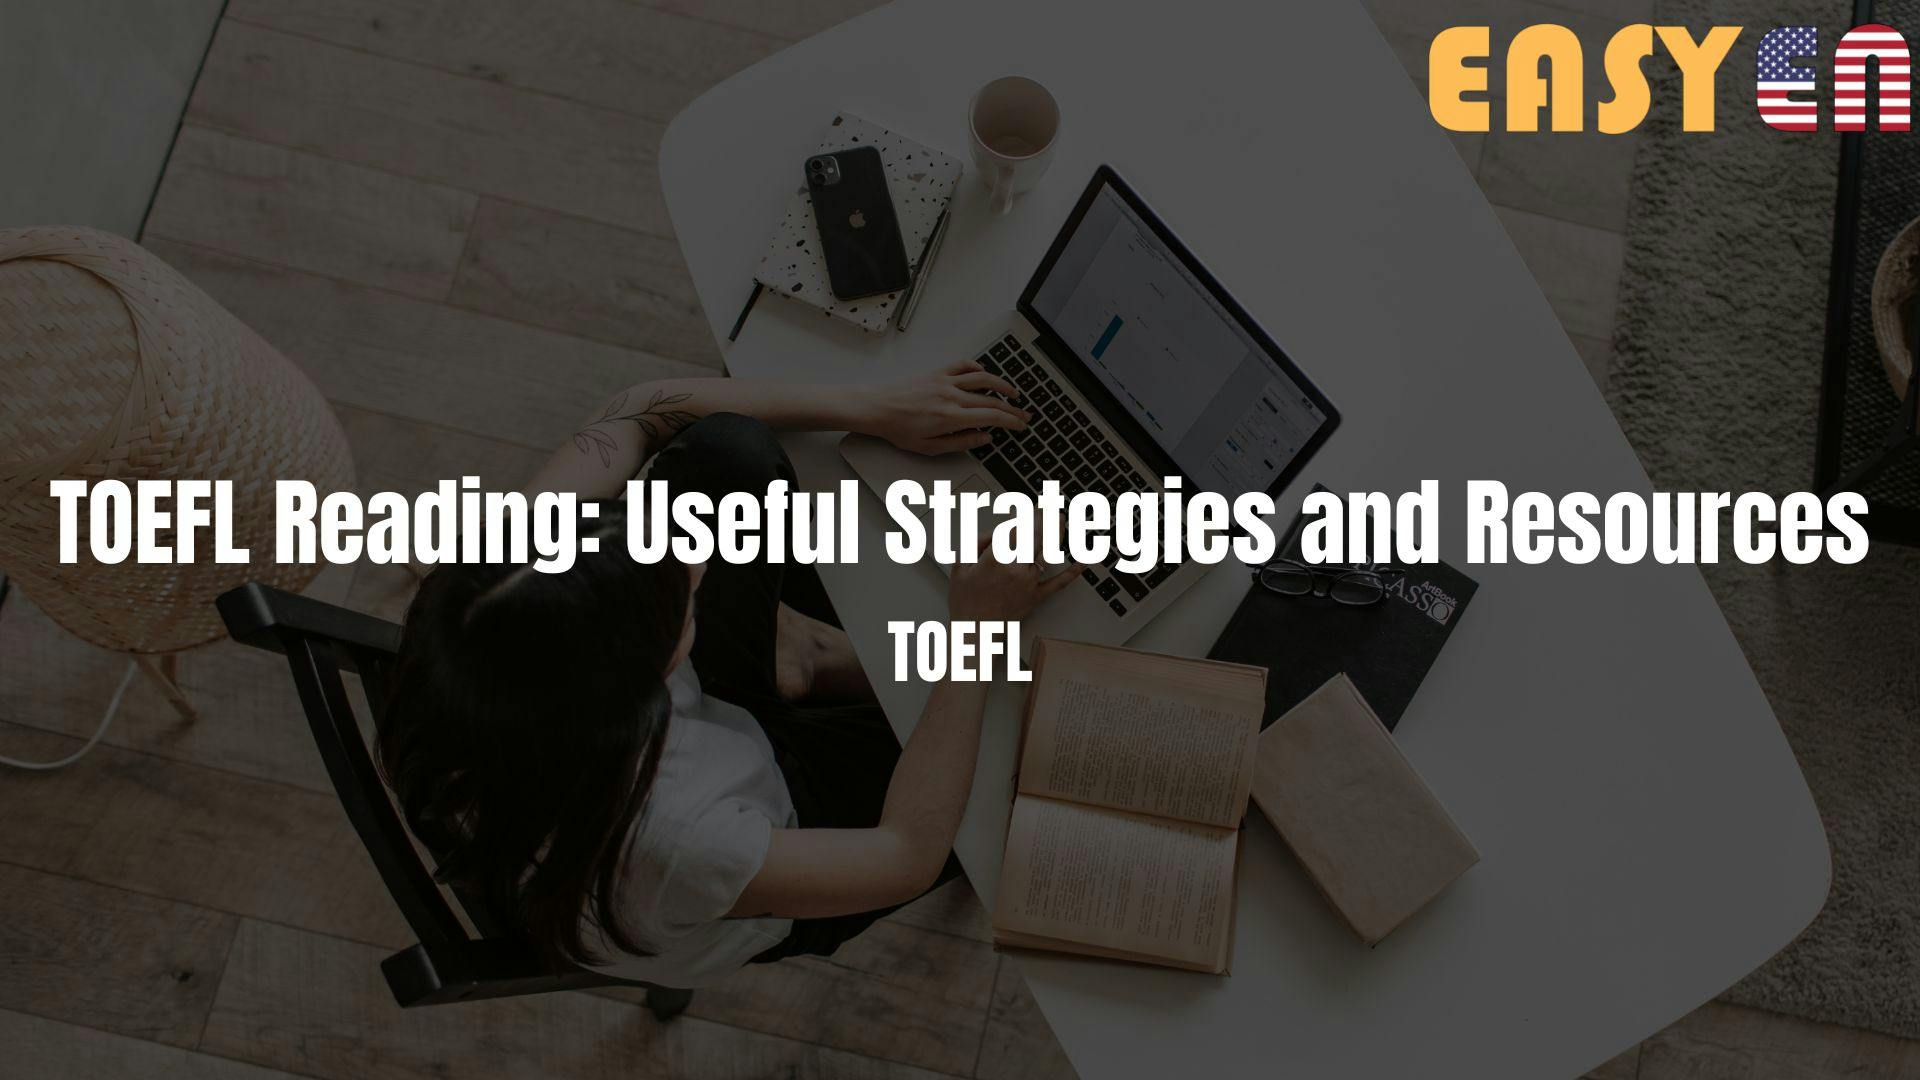 TOEFL Reading: Useful Strategies and Resources